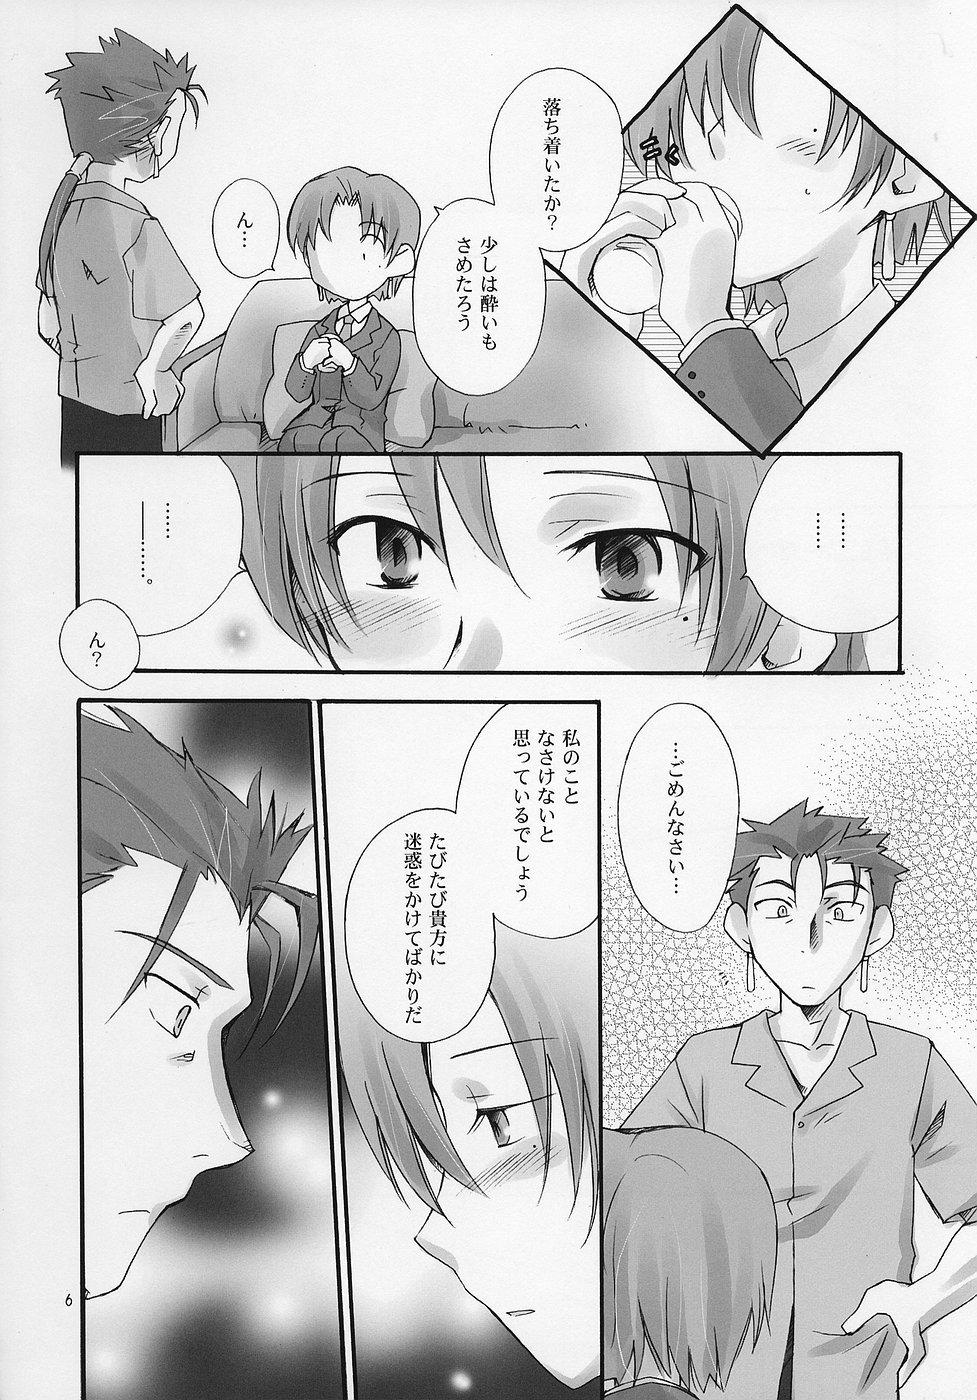 Glasses Honeywhip - Fate hollow ataraxia Stretch - Page 5